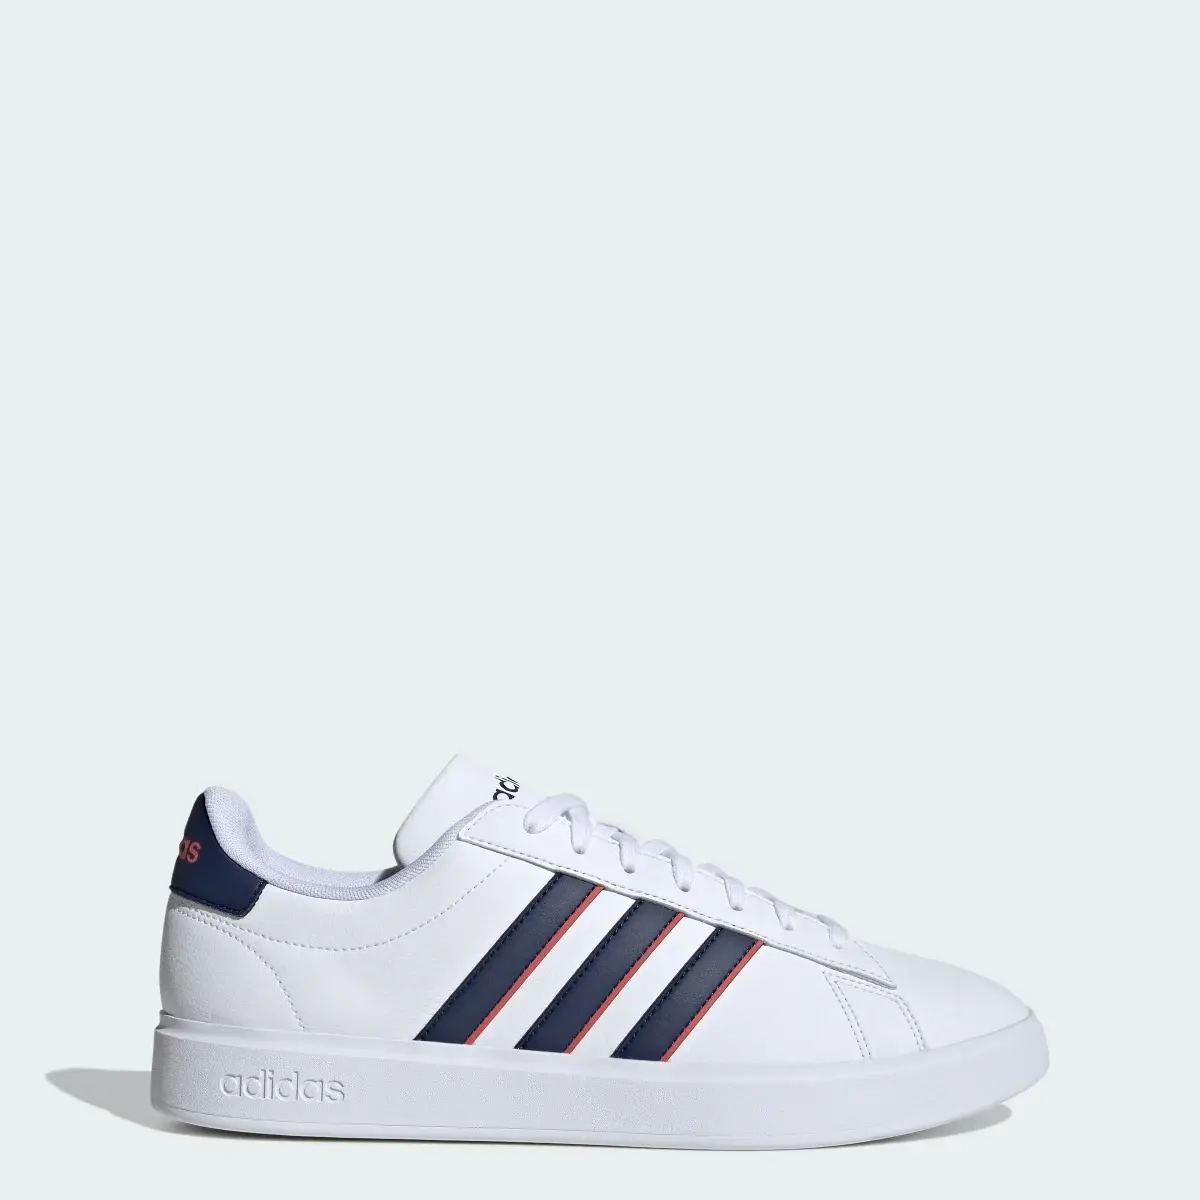 Adidas Grand Court Shoes. 1